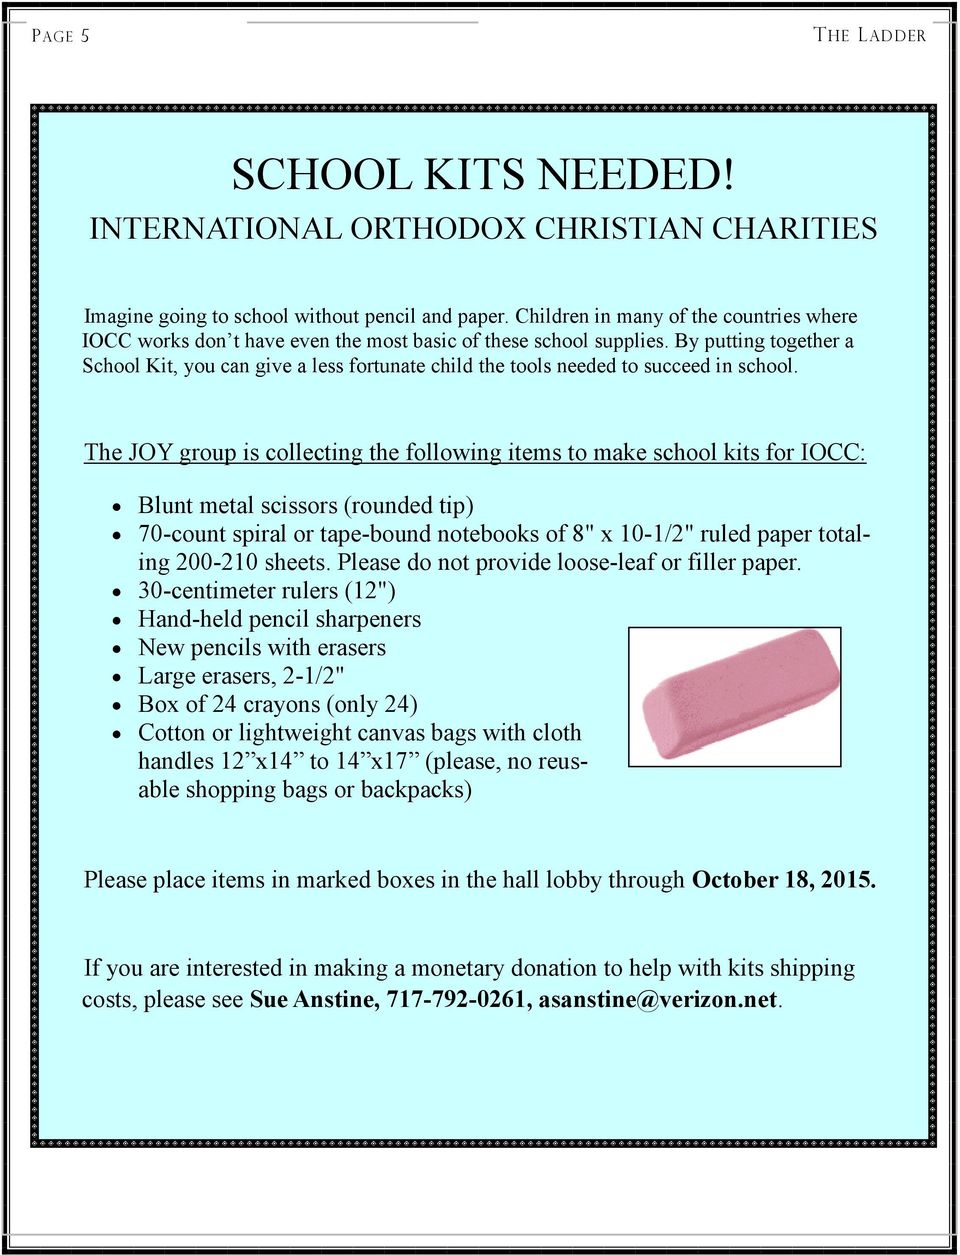 By putting together a School Kit, you can give a less fortunate child the tools needed to succeed in school.